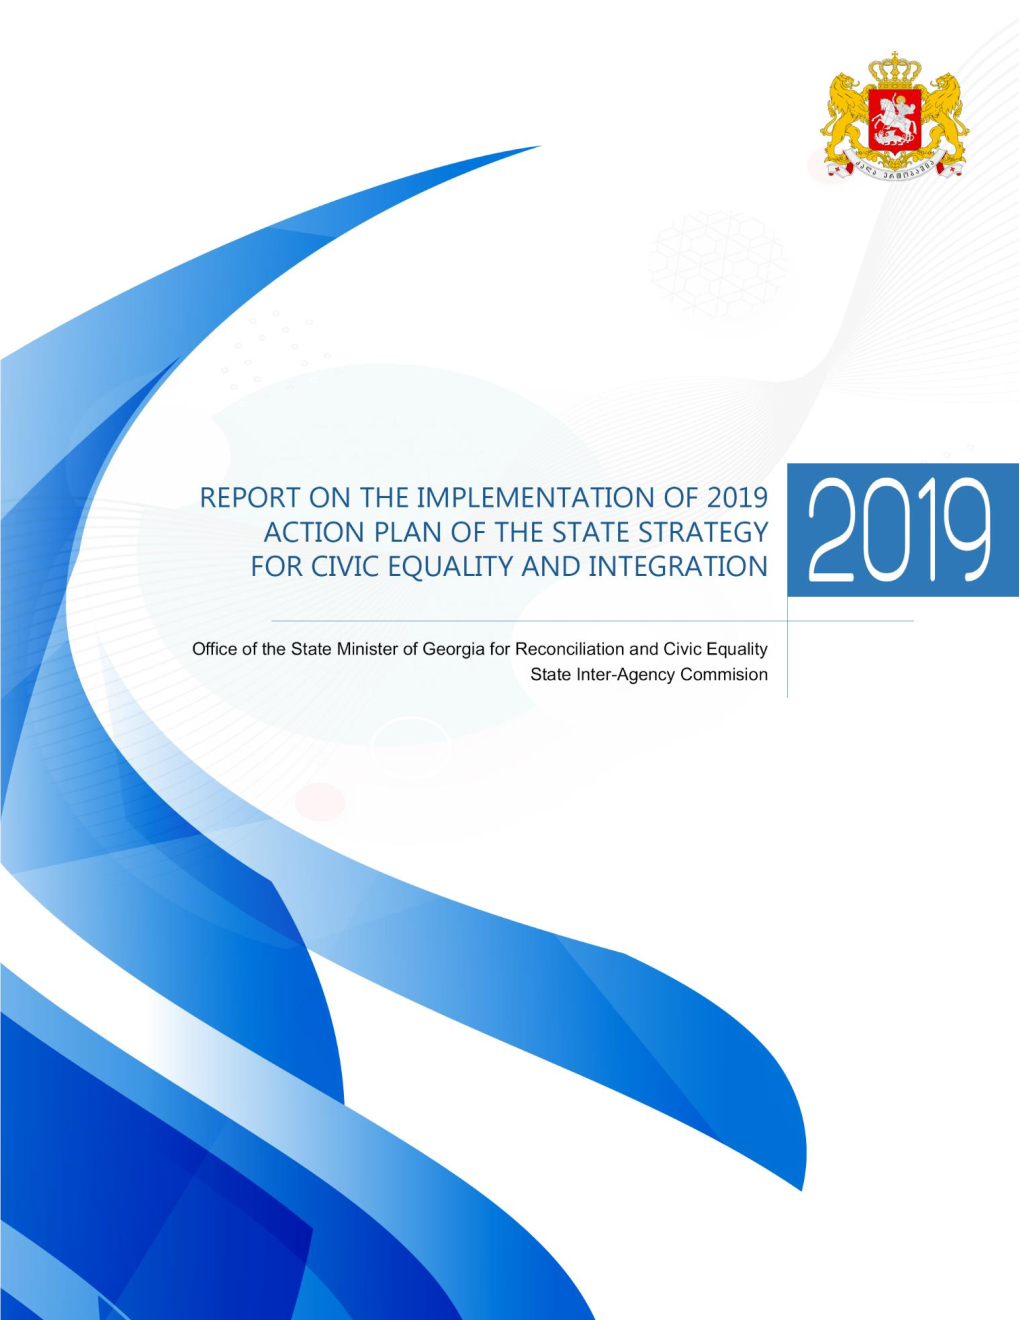 Report on the Implementation of 2019 Action Plan of the State Strategy for Civic Equality and Integration